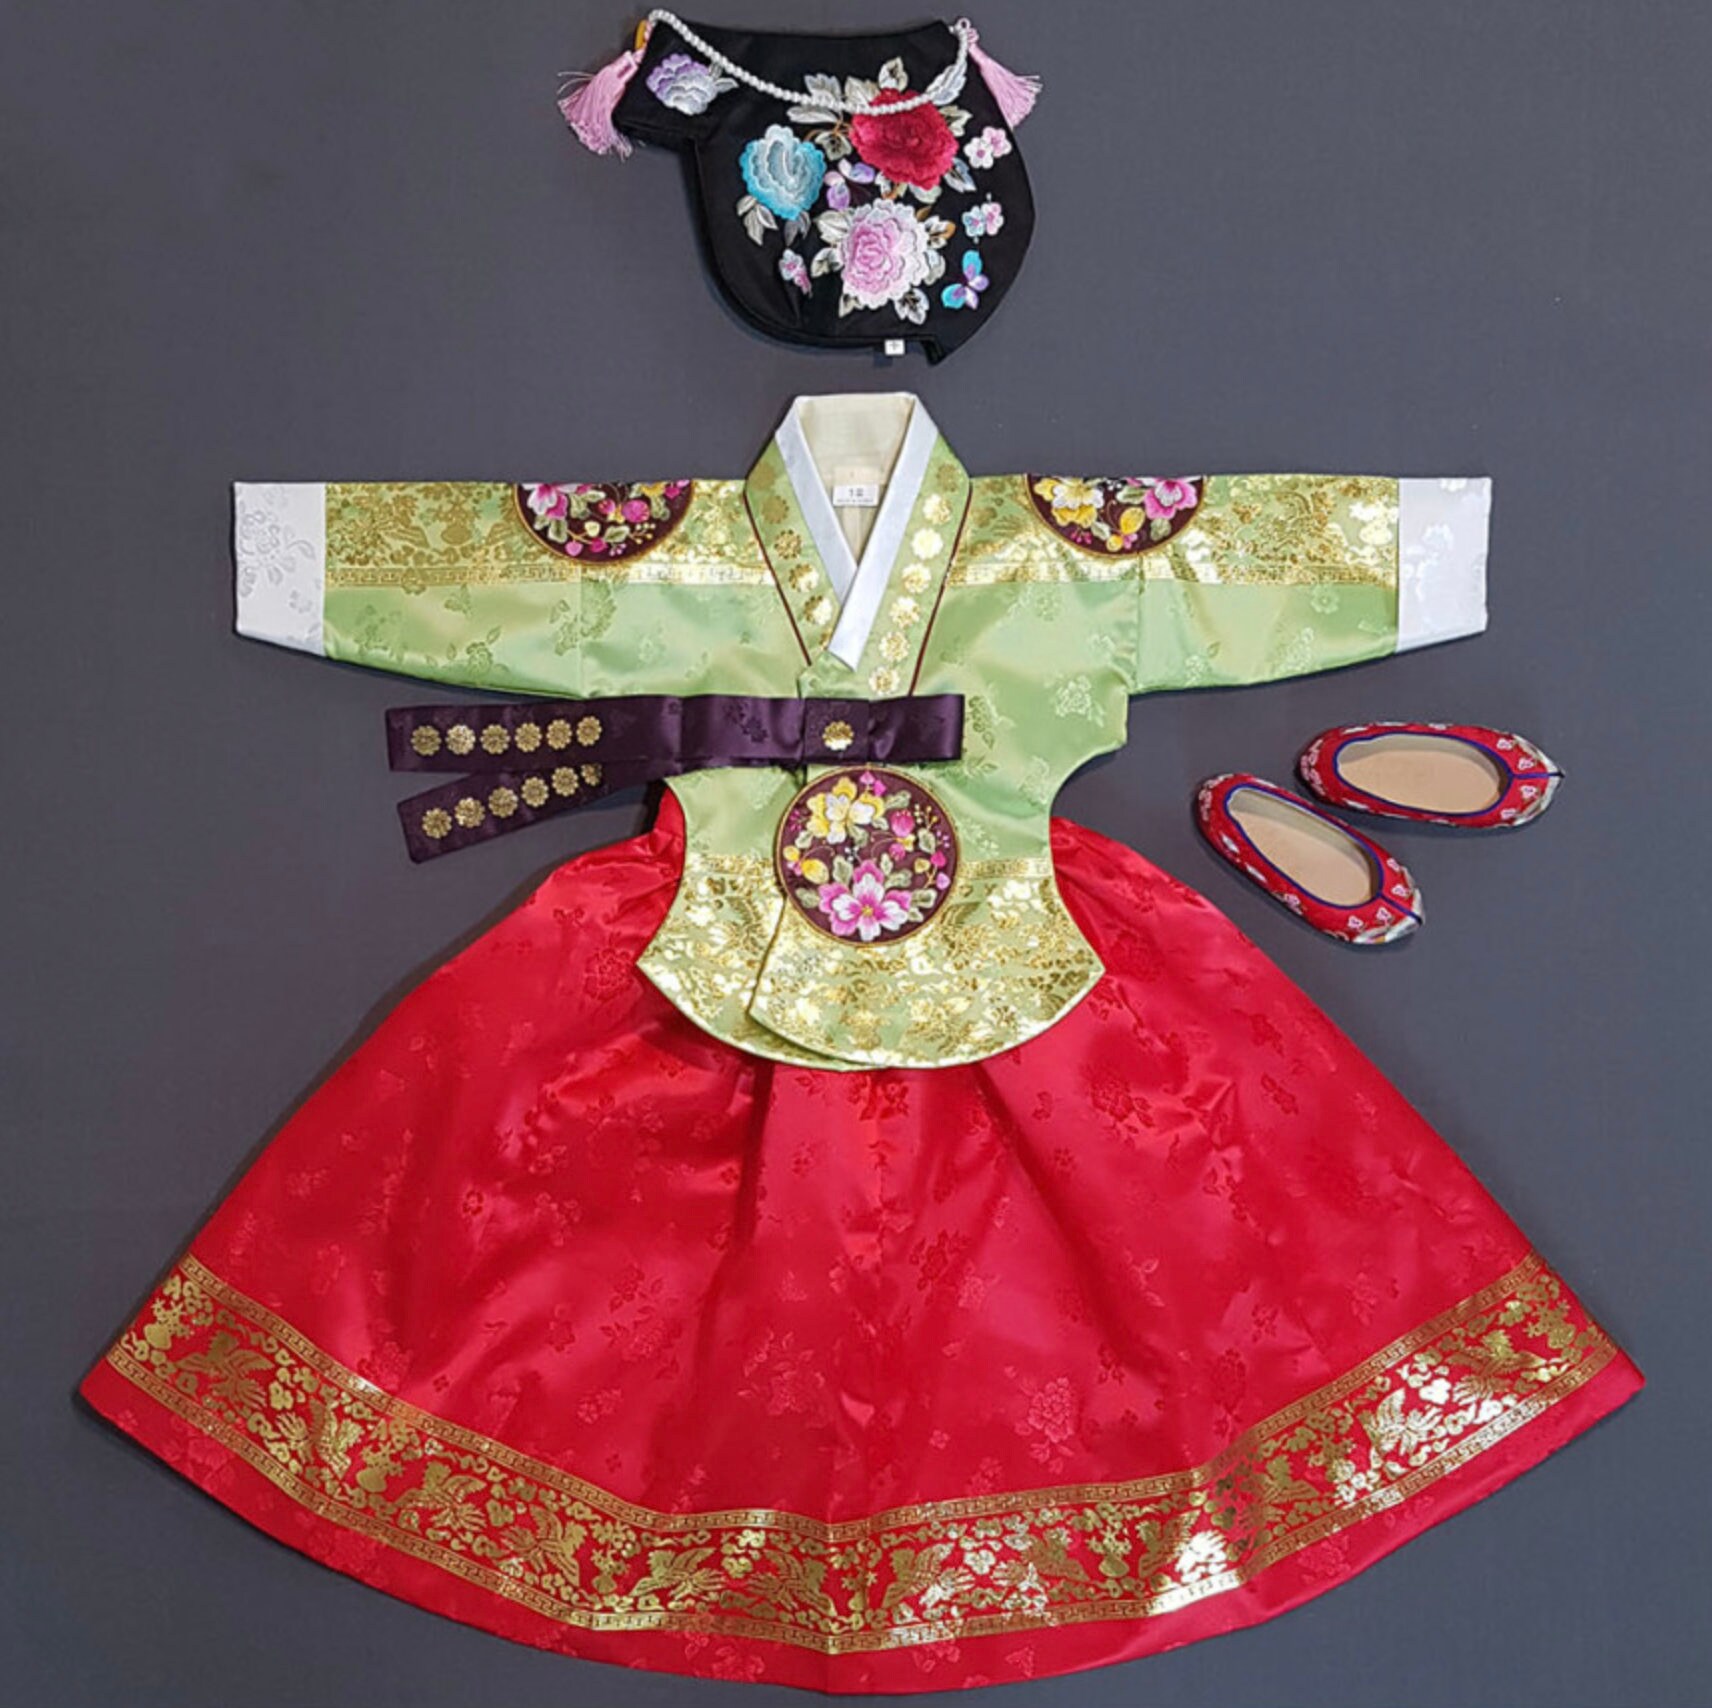 Hanbok Experience – Wearing Traditional Korean Dress in Seoul as a Tourist